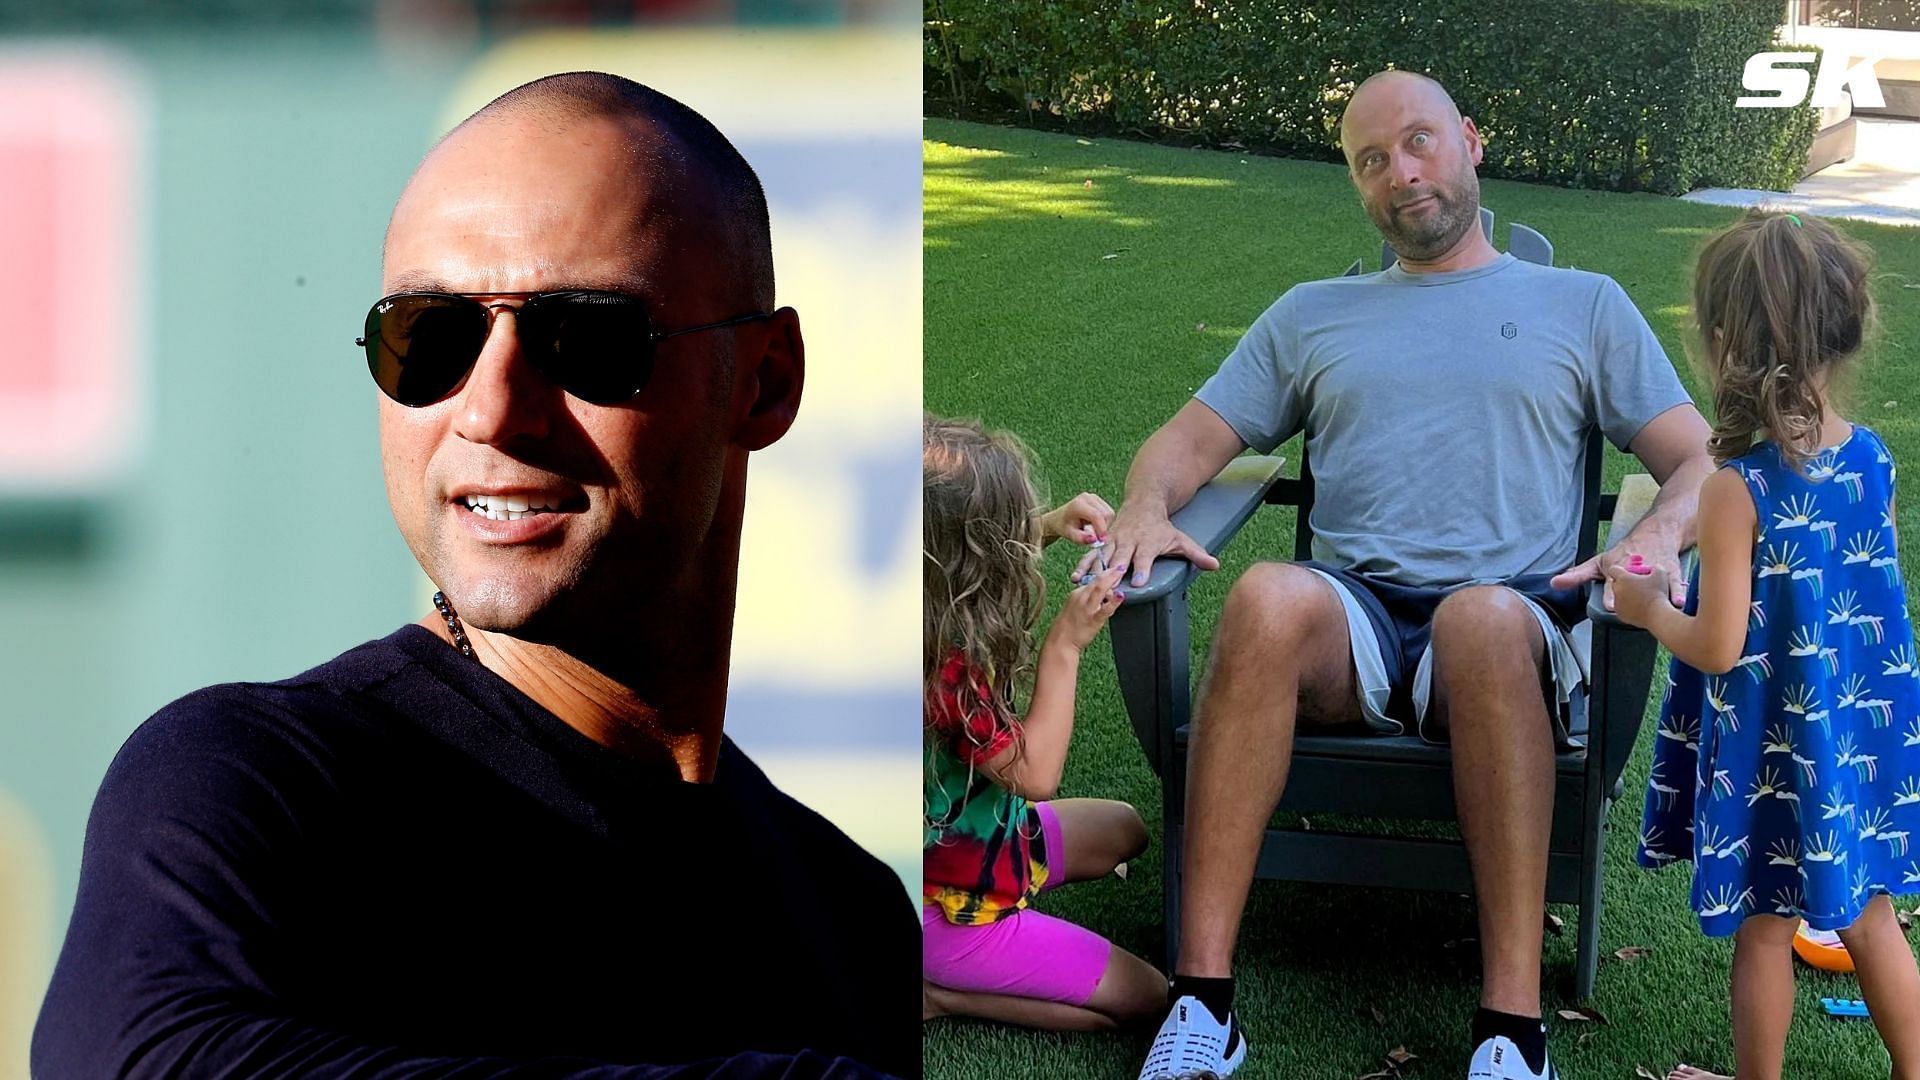 Derek Jeter has weighed on who he thinks his kids remind him of